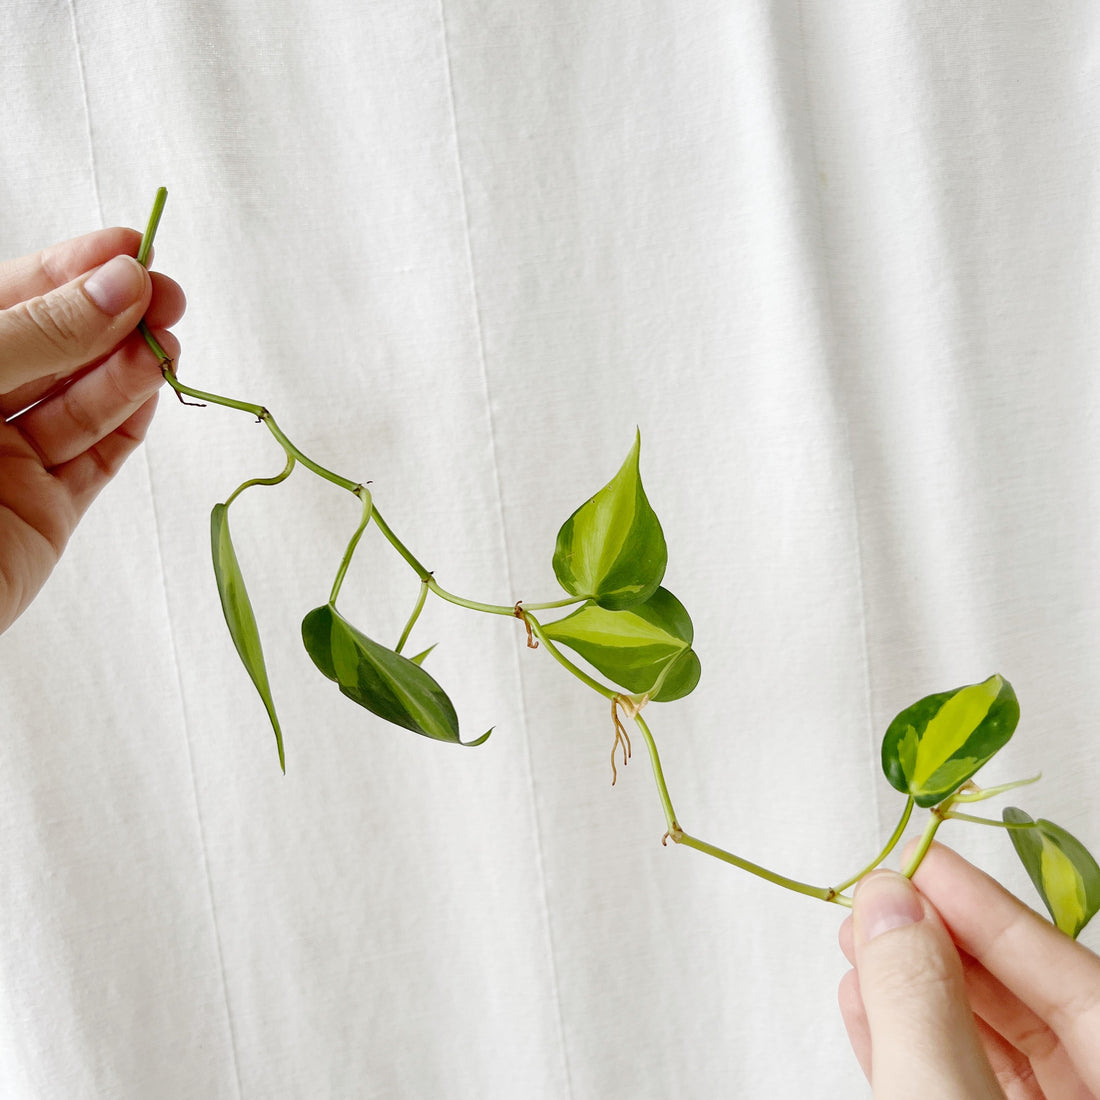 Pruning Your Houseplants: Everything You Need to Know about Why When + How!